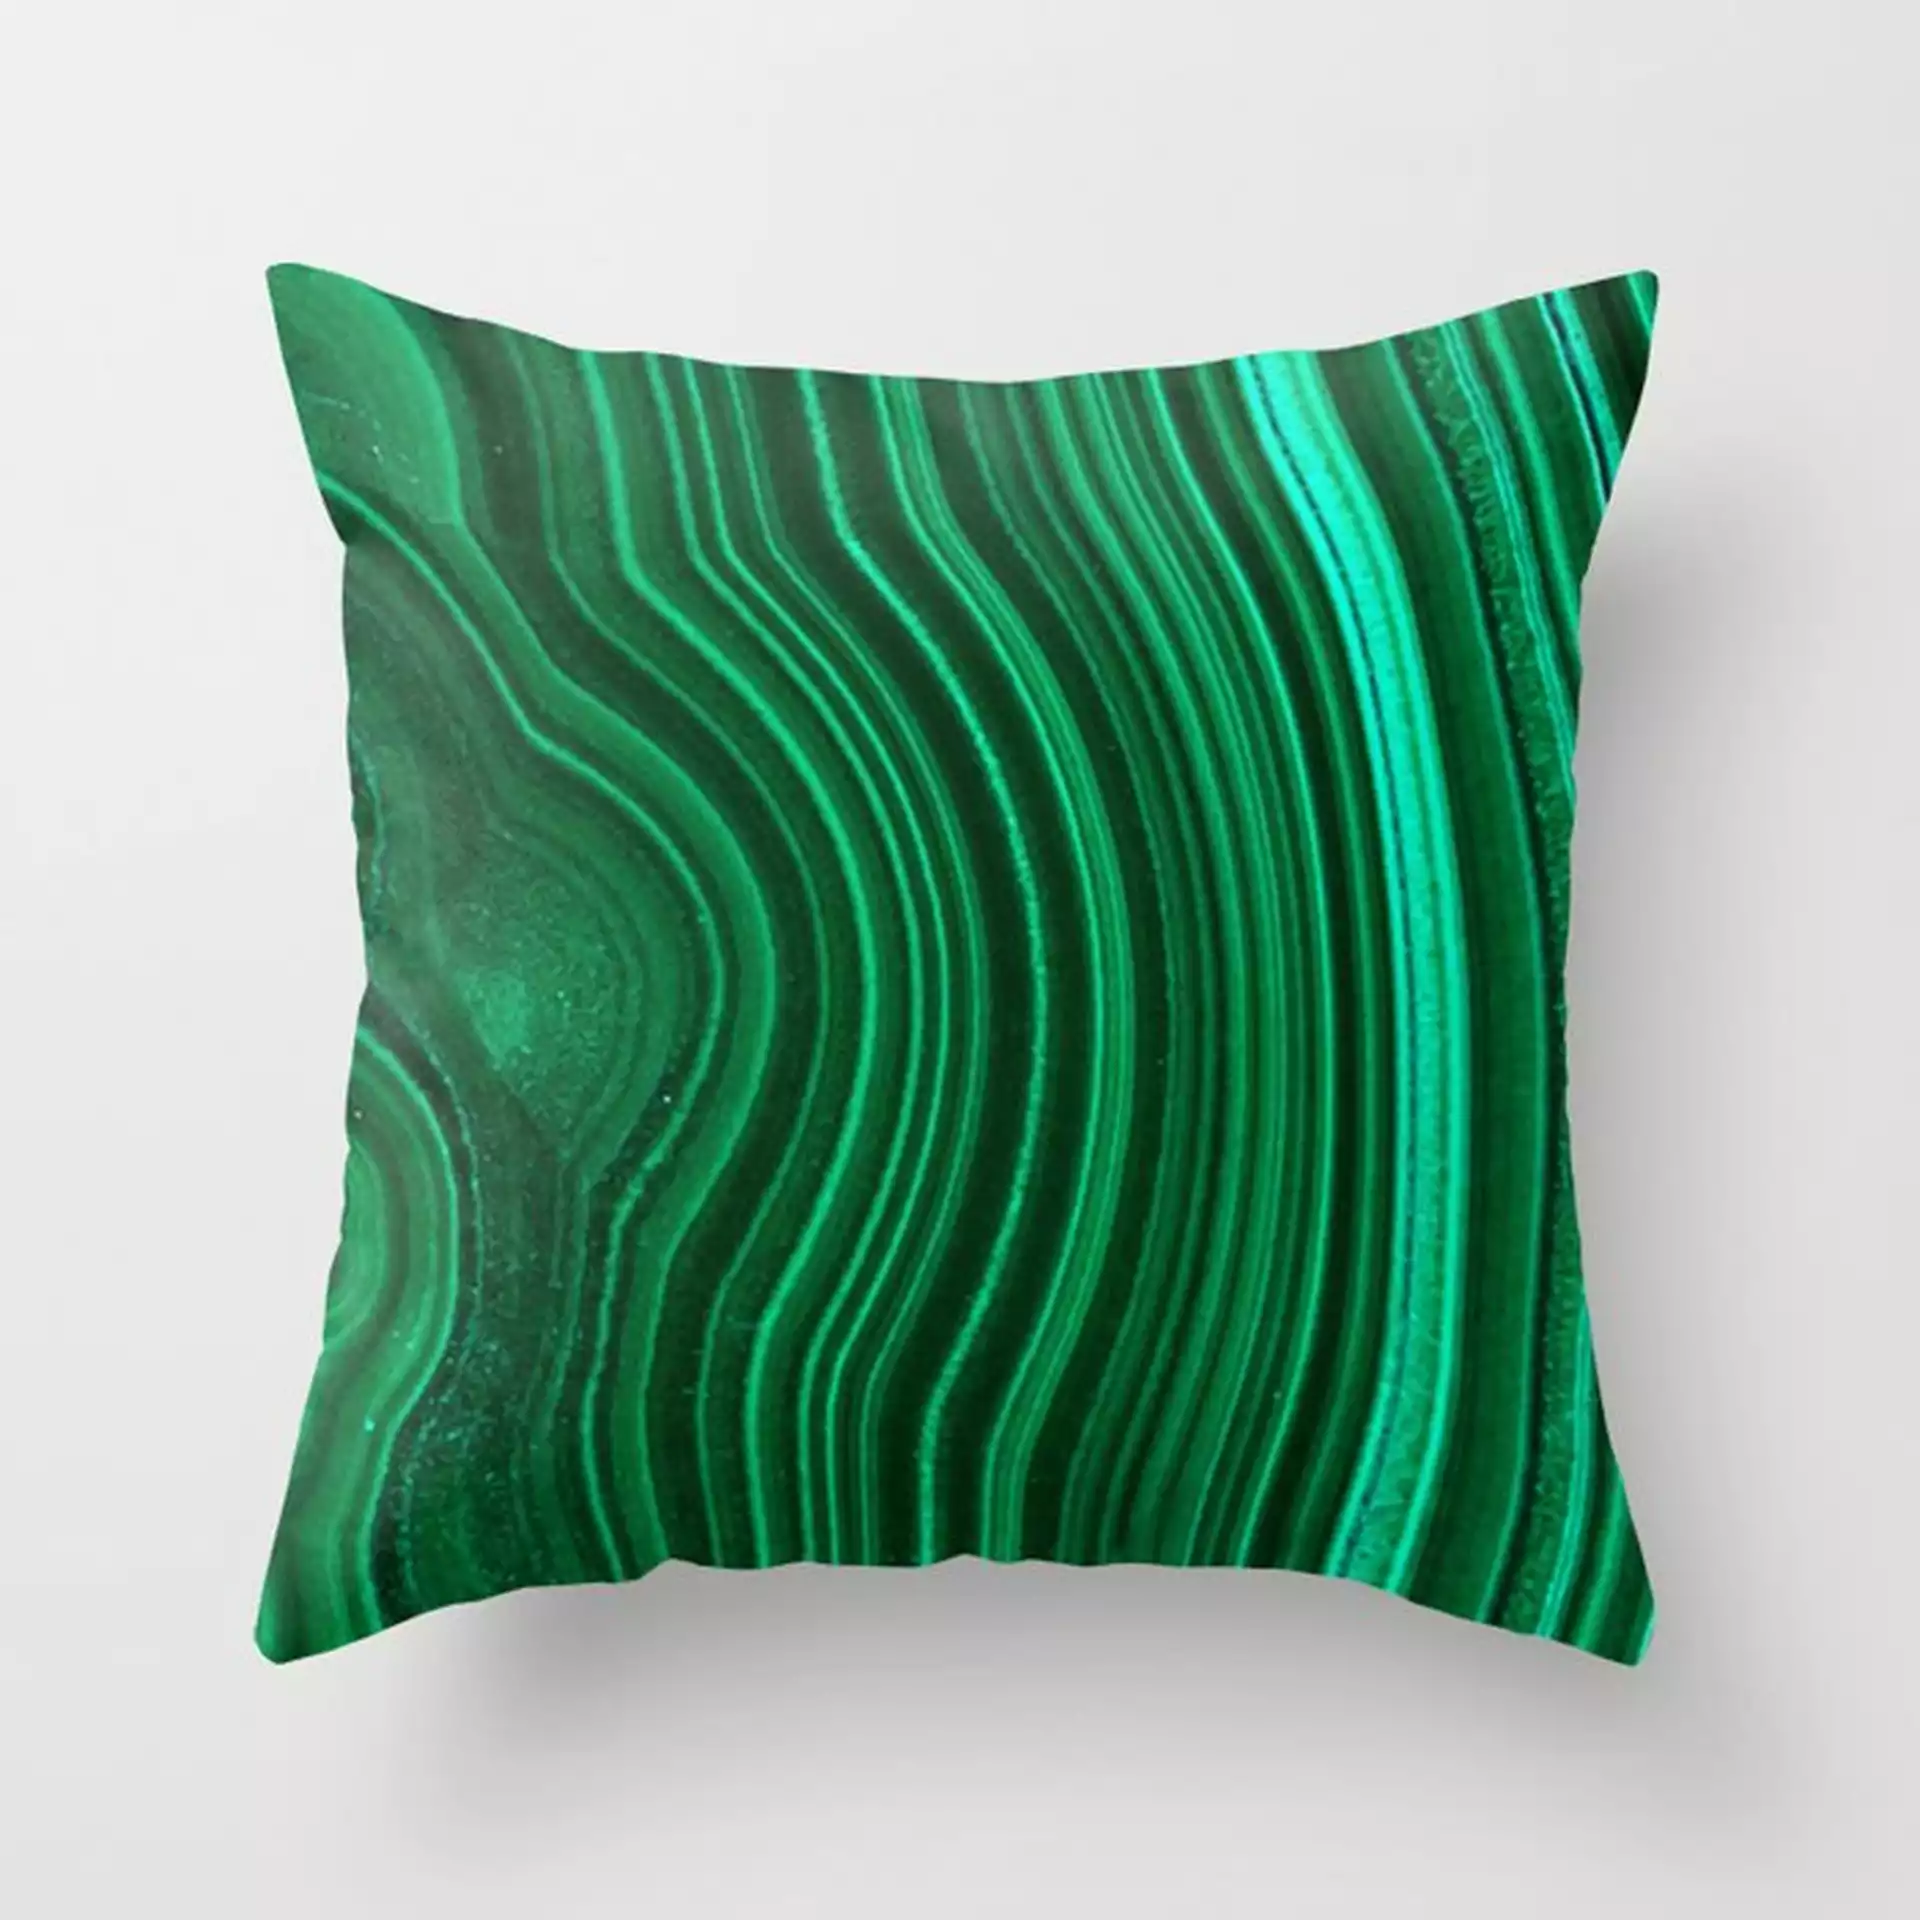 Malachite No. 2 Couch Throw Pillow by The Aestate - Cover (18" x 18") with pillow insert - Outdoor Pillow